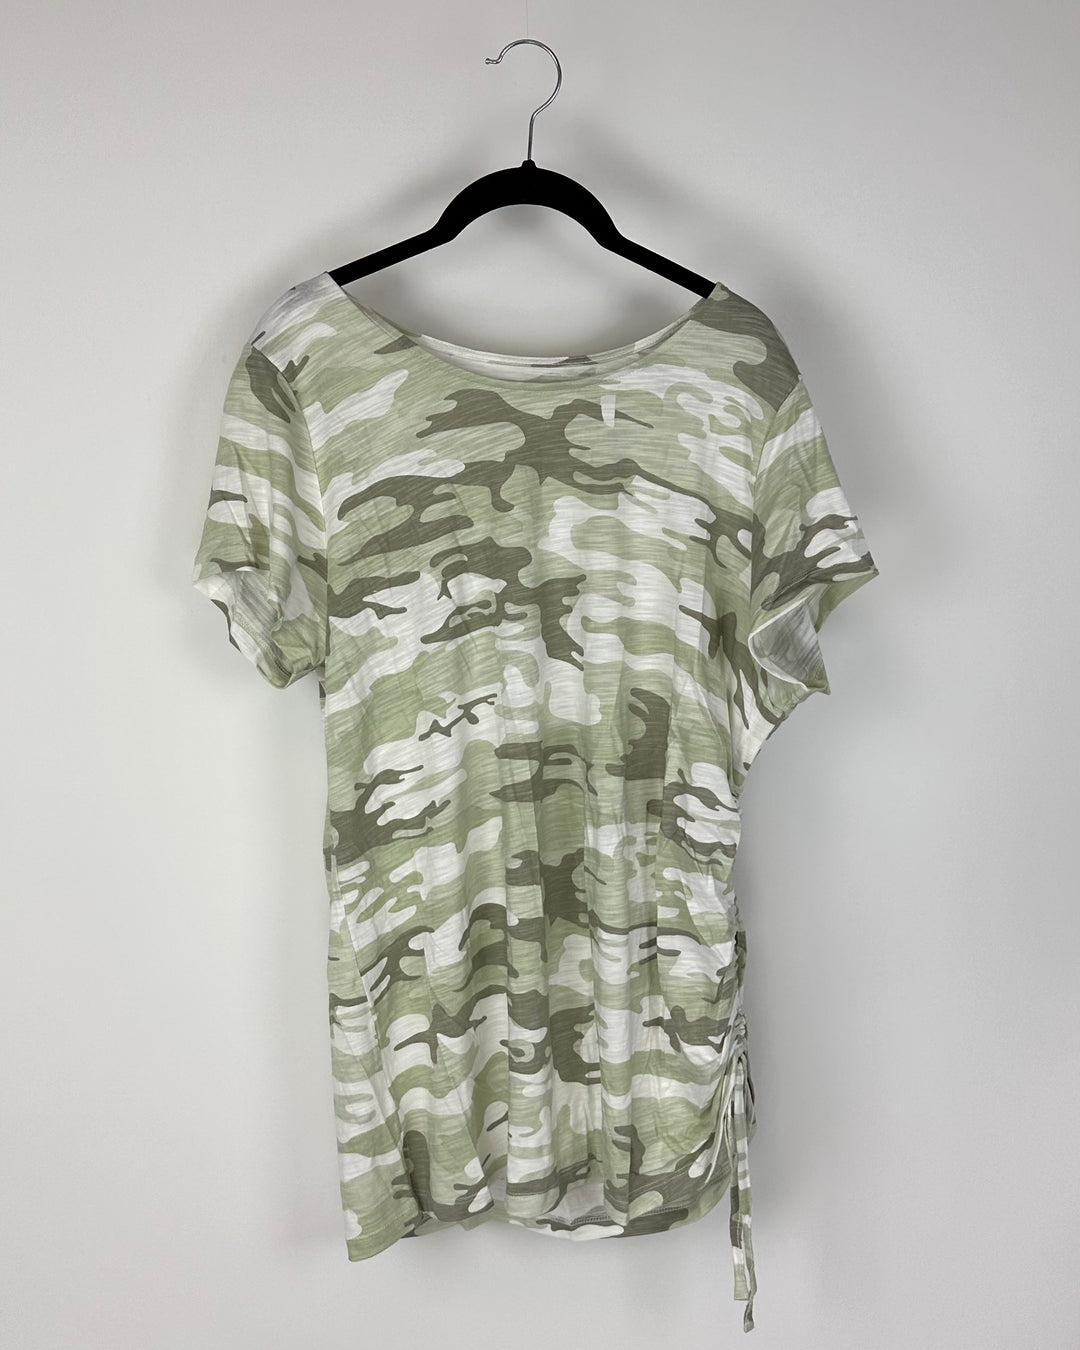 Light Wash Camo Short Sleeve T-Shirt With Ruching - Size 14-16